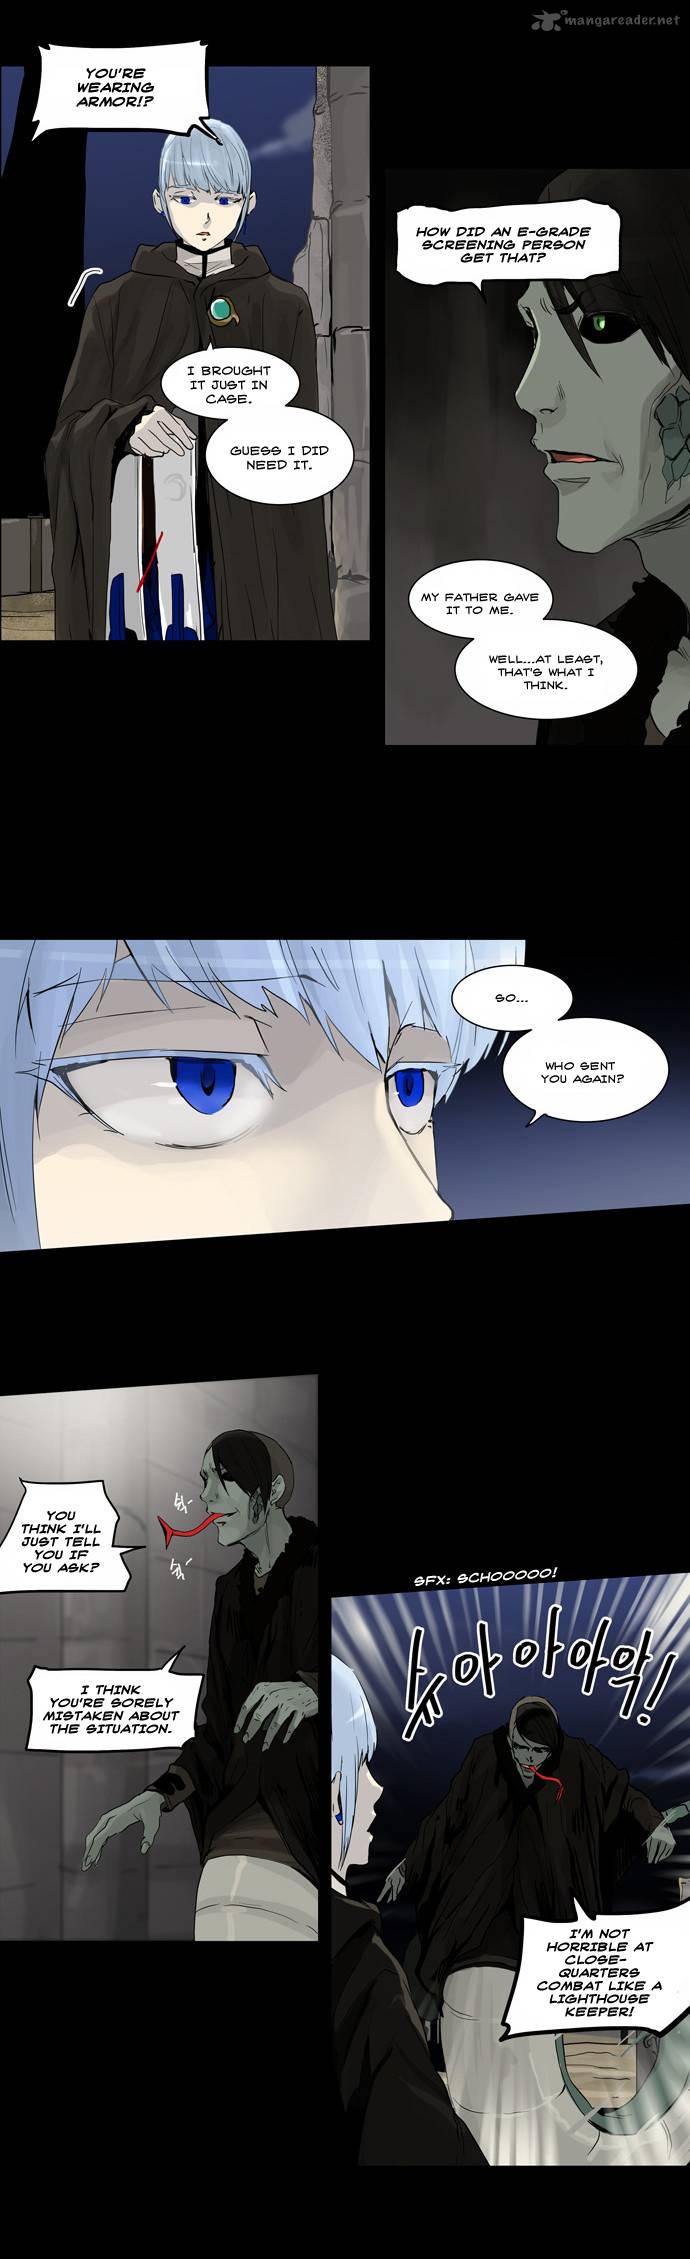 Tower Of God 127 18